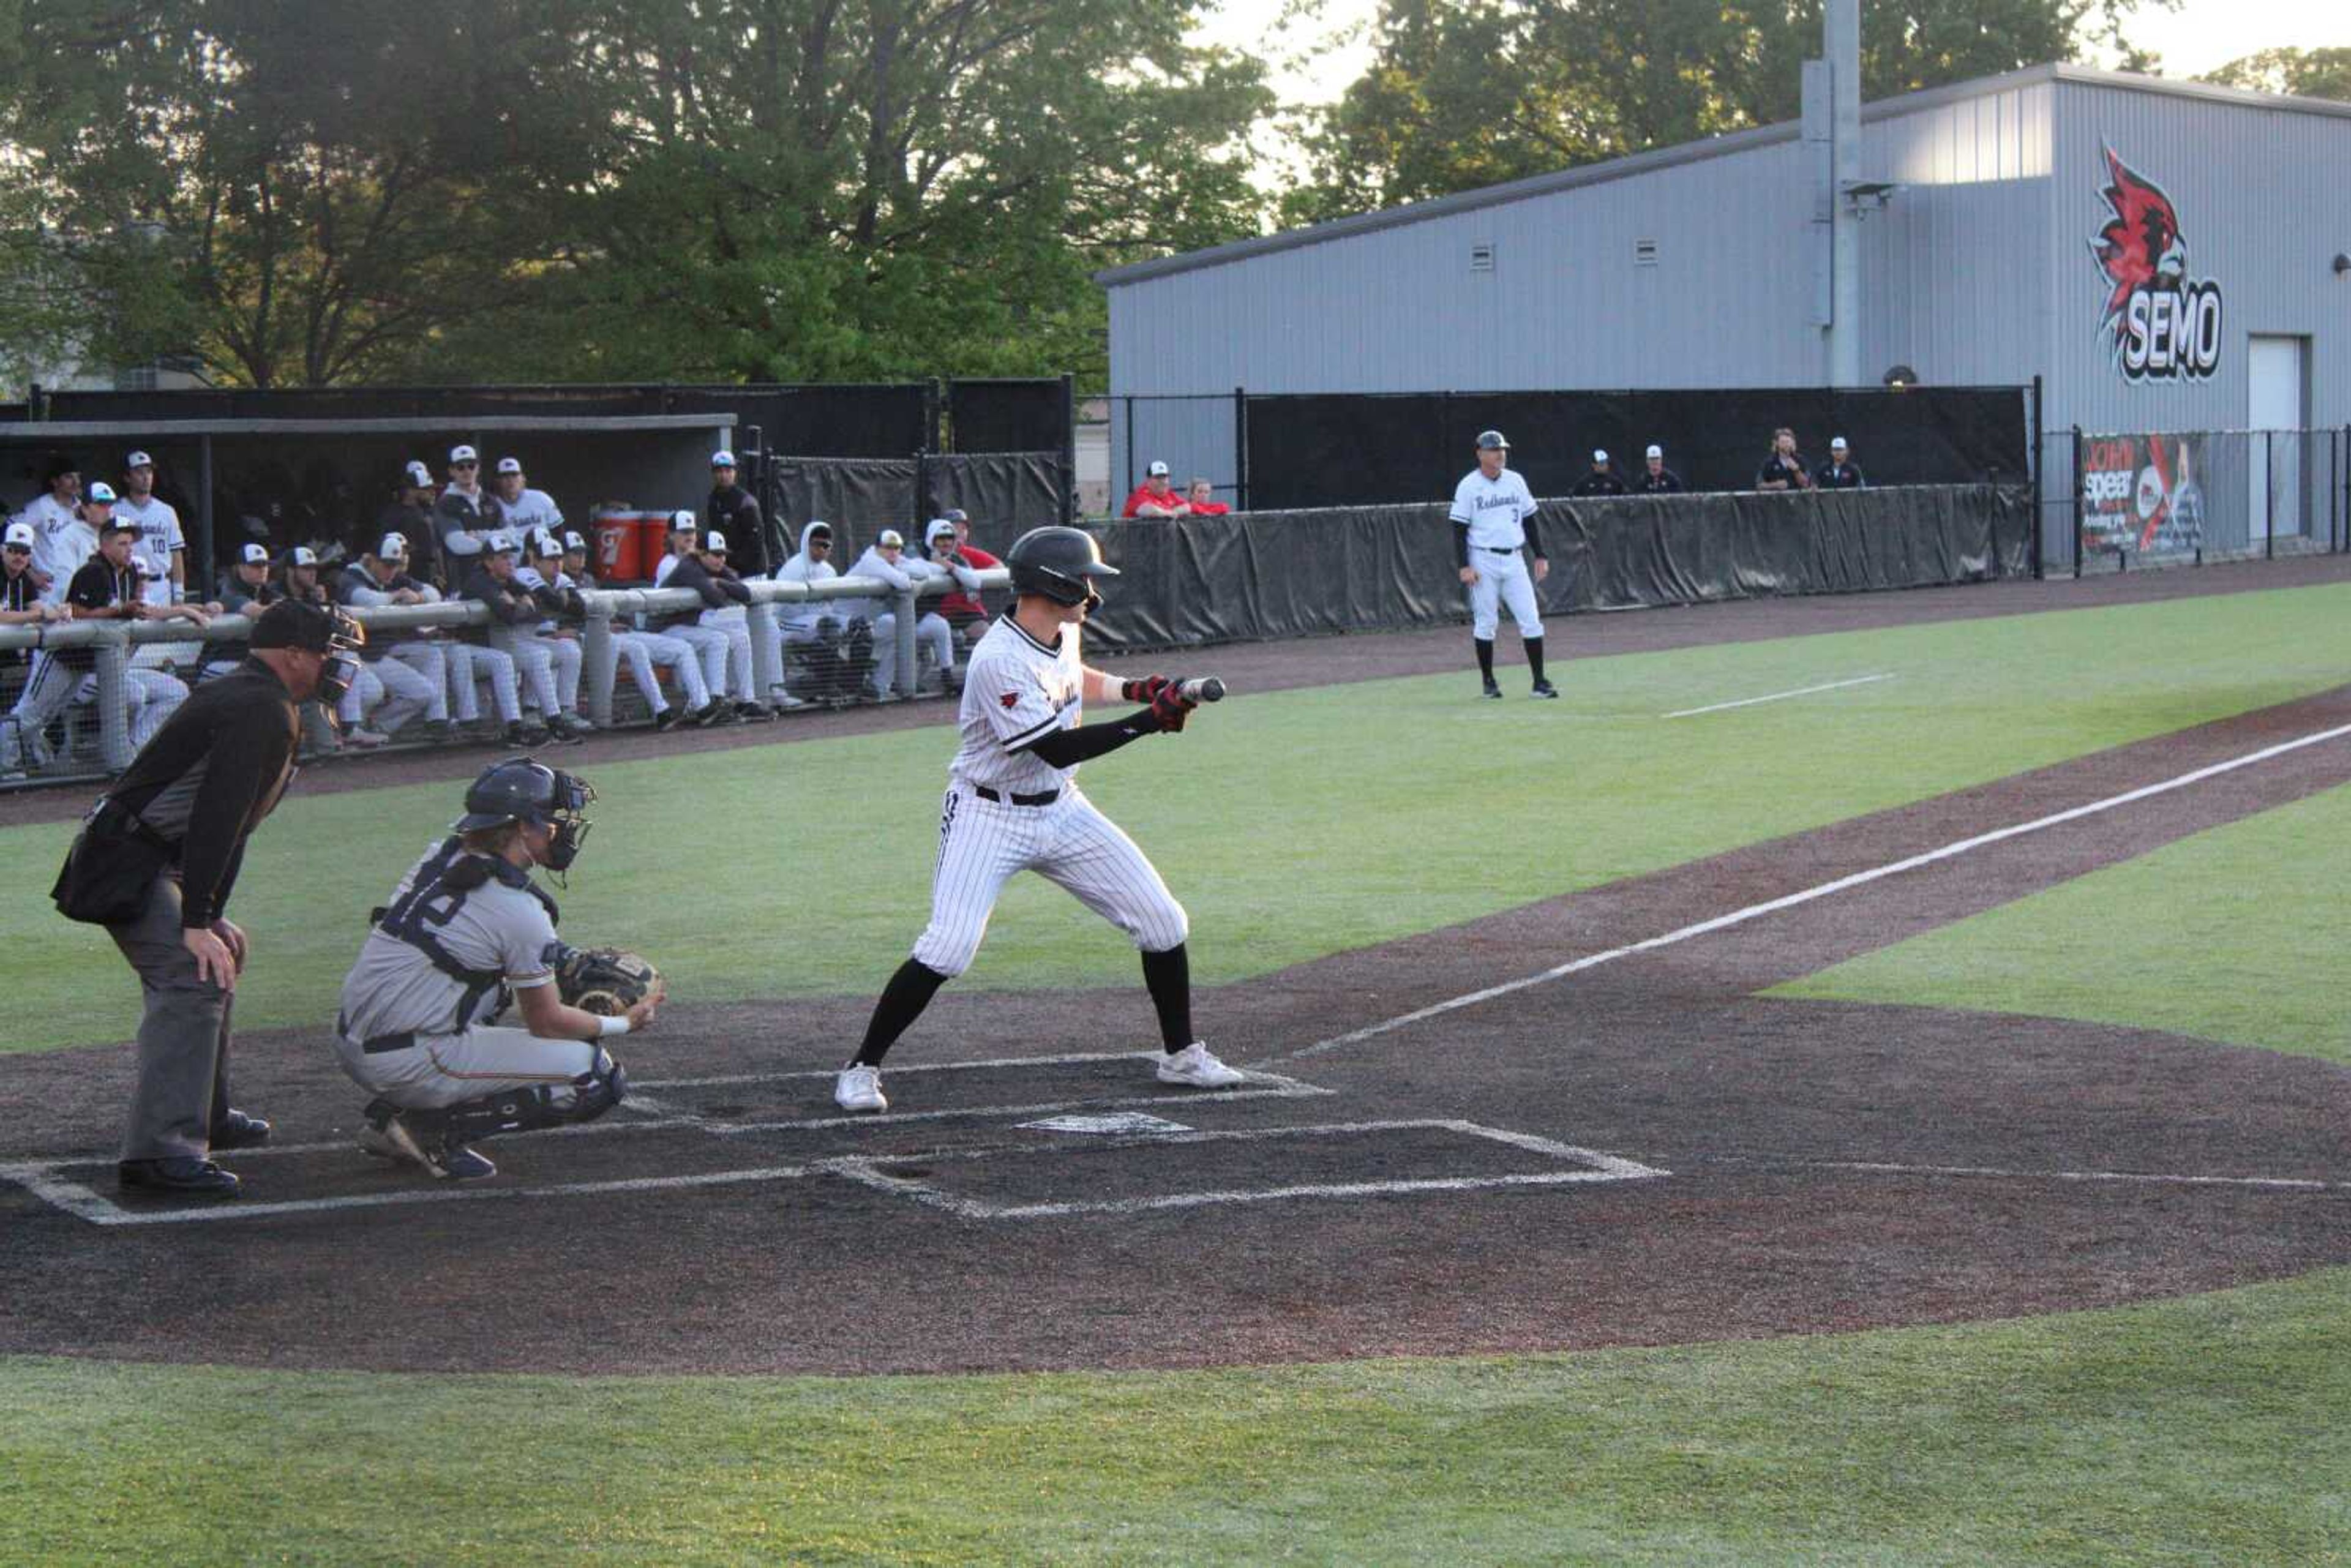 SEMO baseball gets shut out to Murray, snapping win streak at four